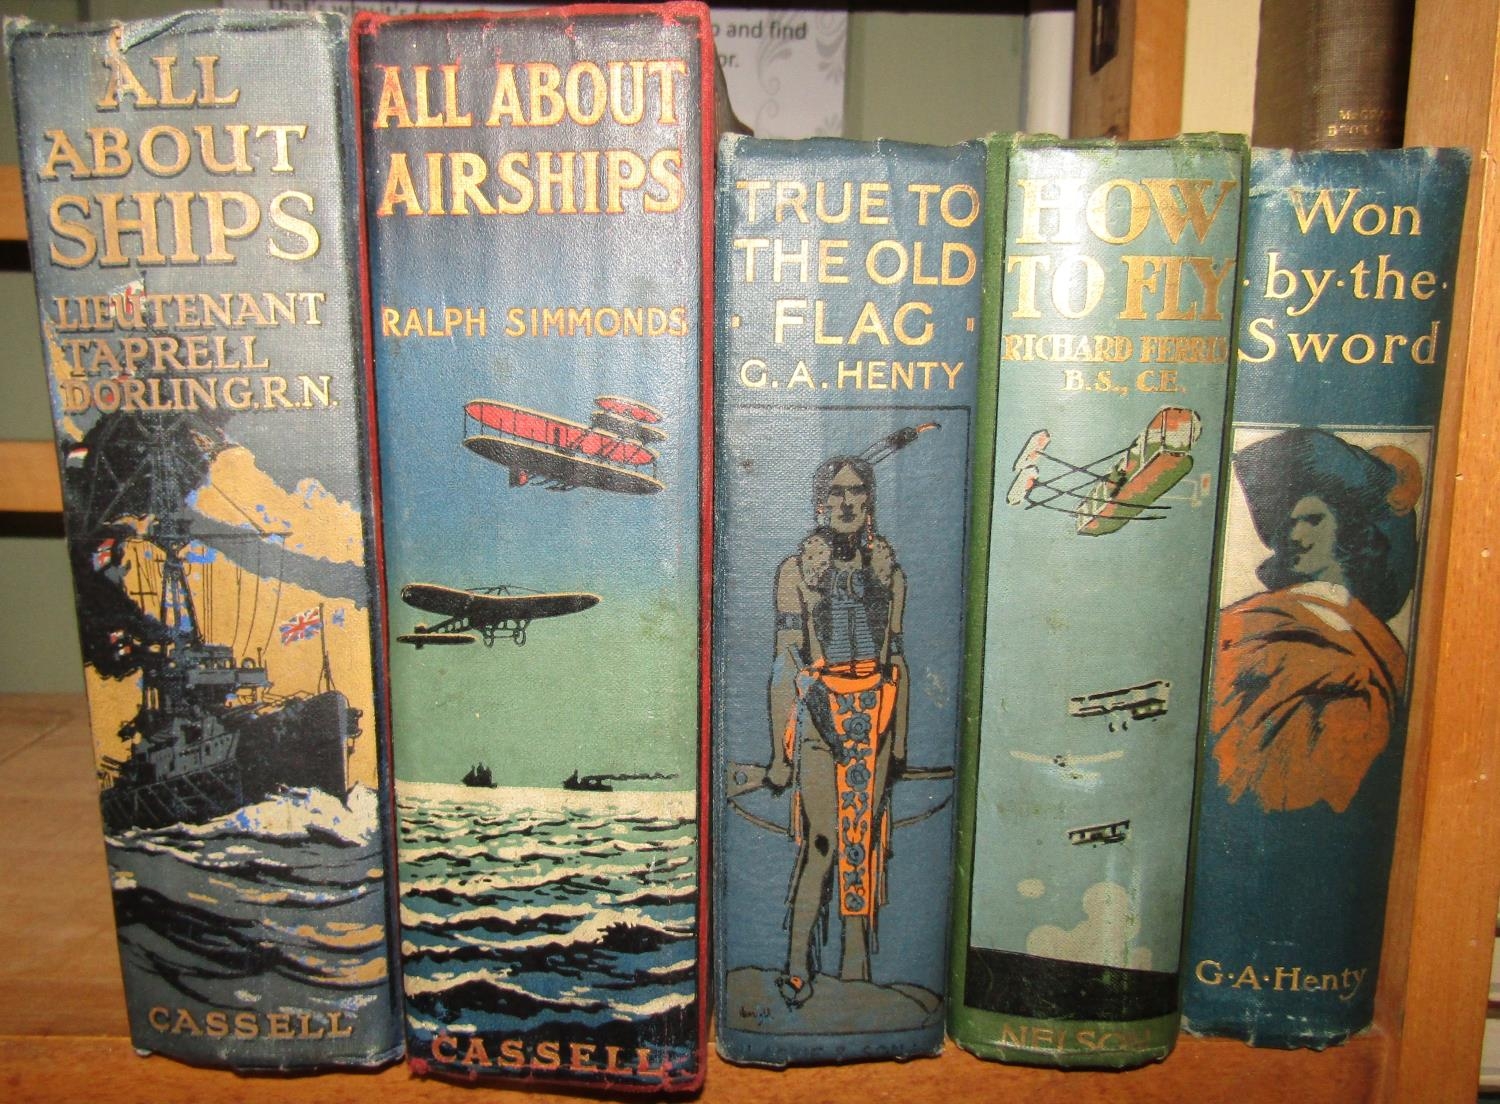 Edwardian boy's books with decorated spines including All About Airships by Ralph Simmonds 1918